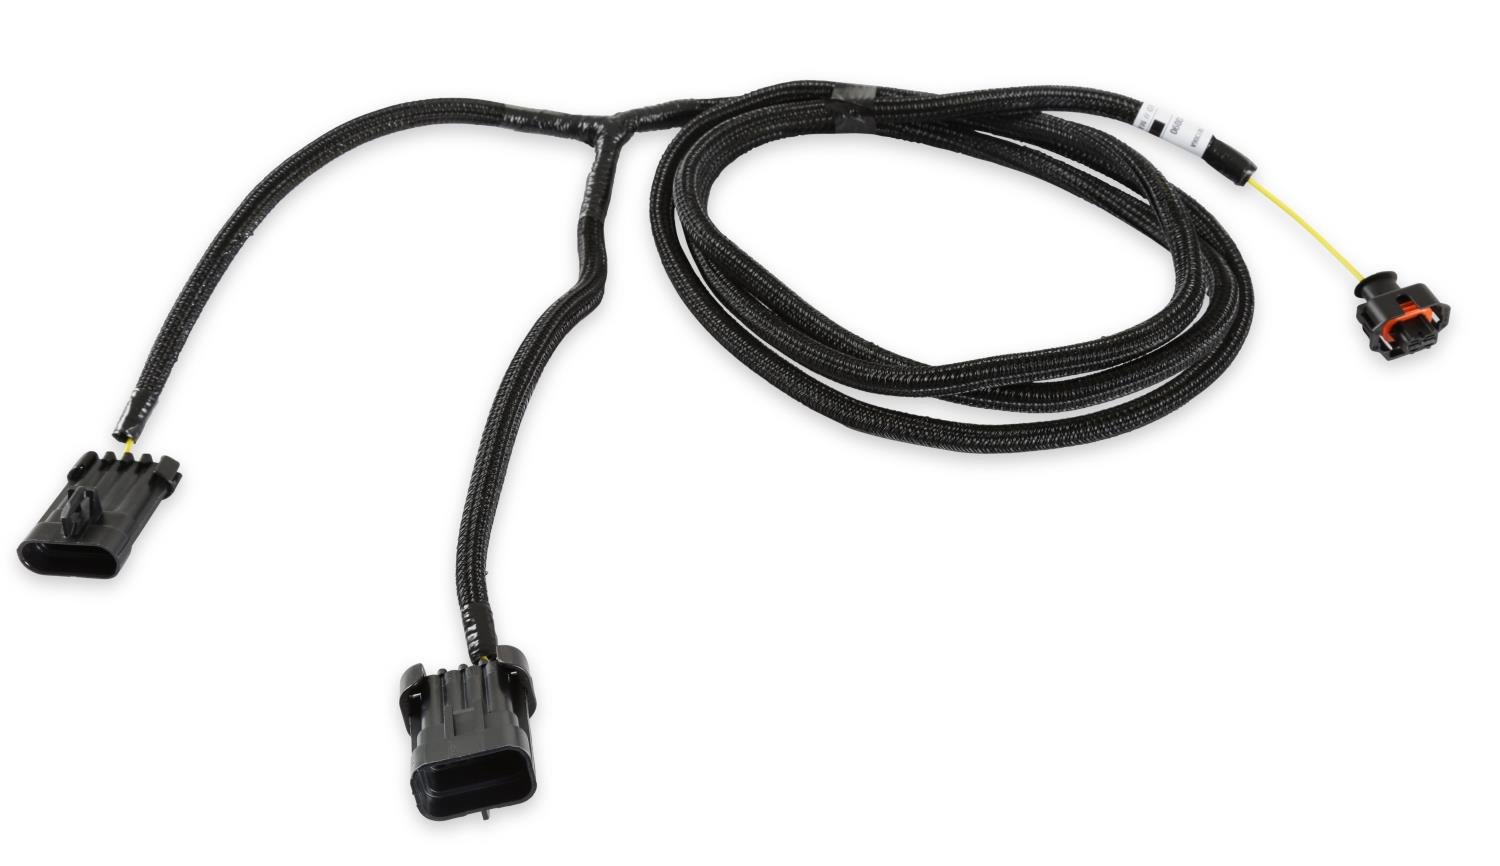 Wiring Harness for Ford Pulse Width Modulation (PWM)